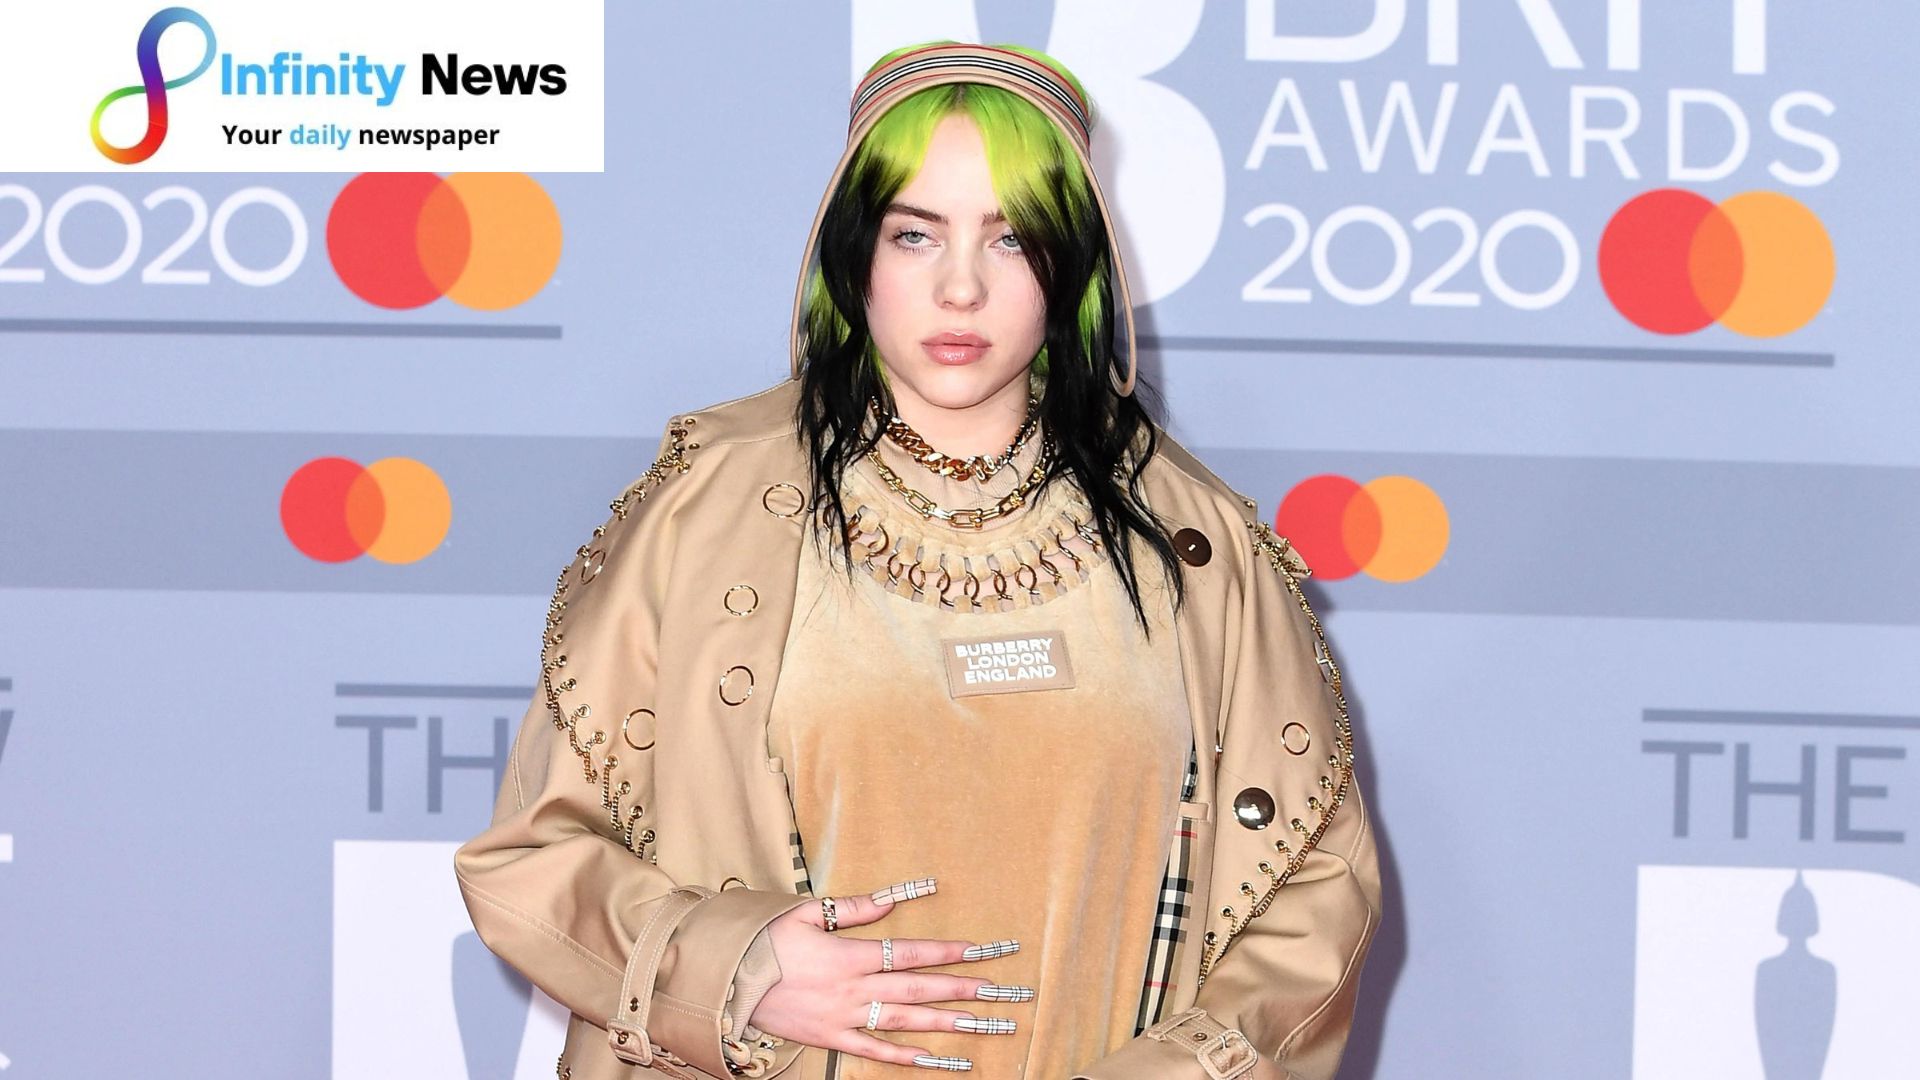 Billie Eilish to show up at UK climate change event